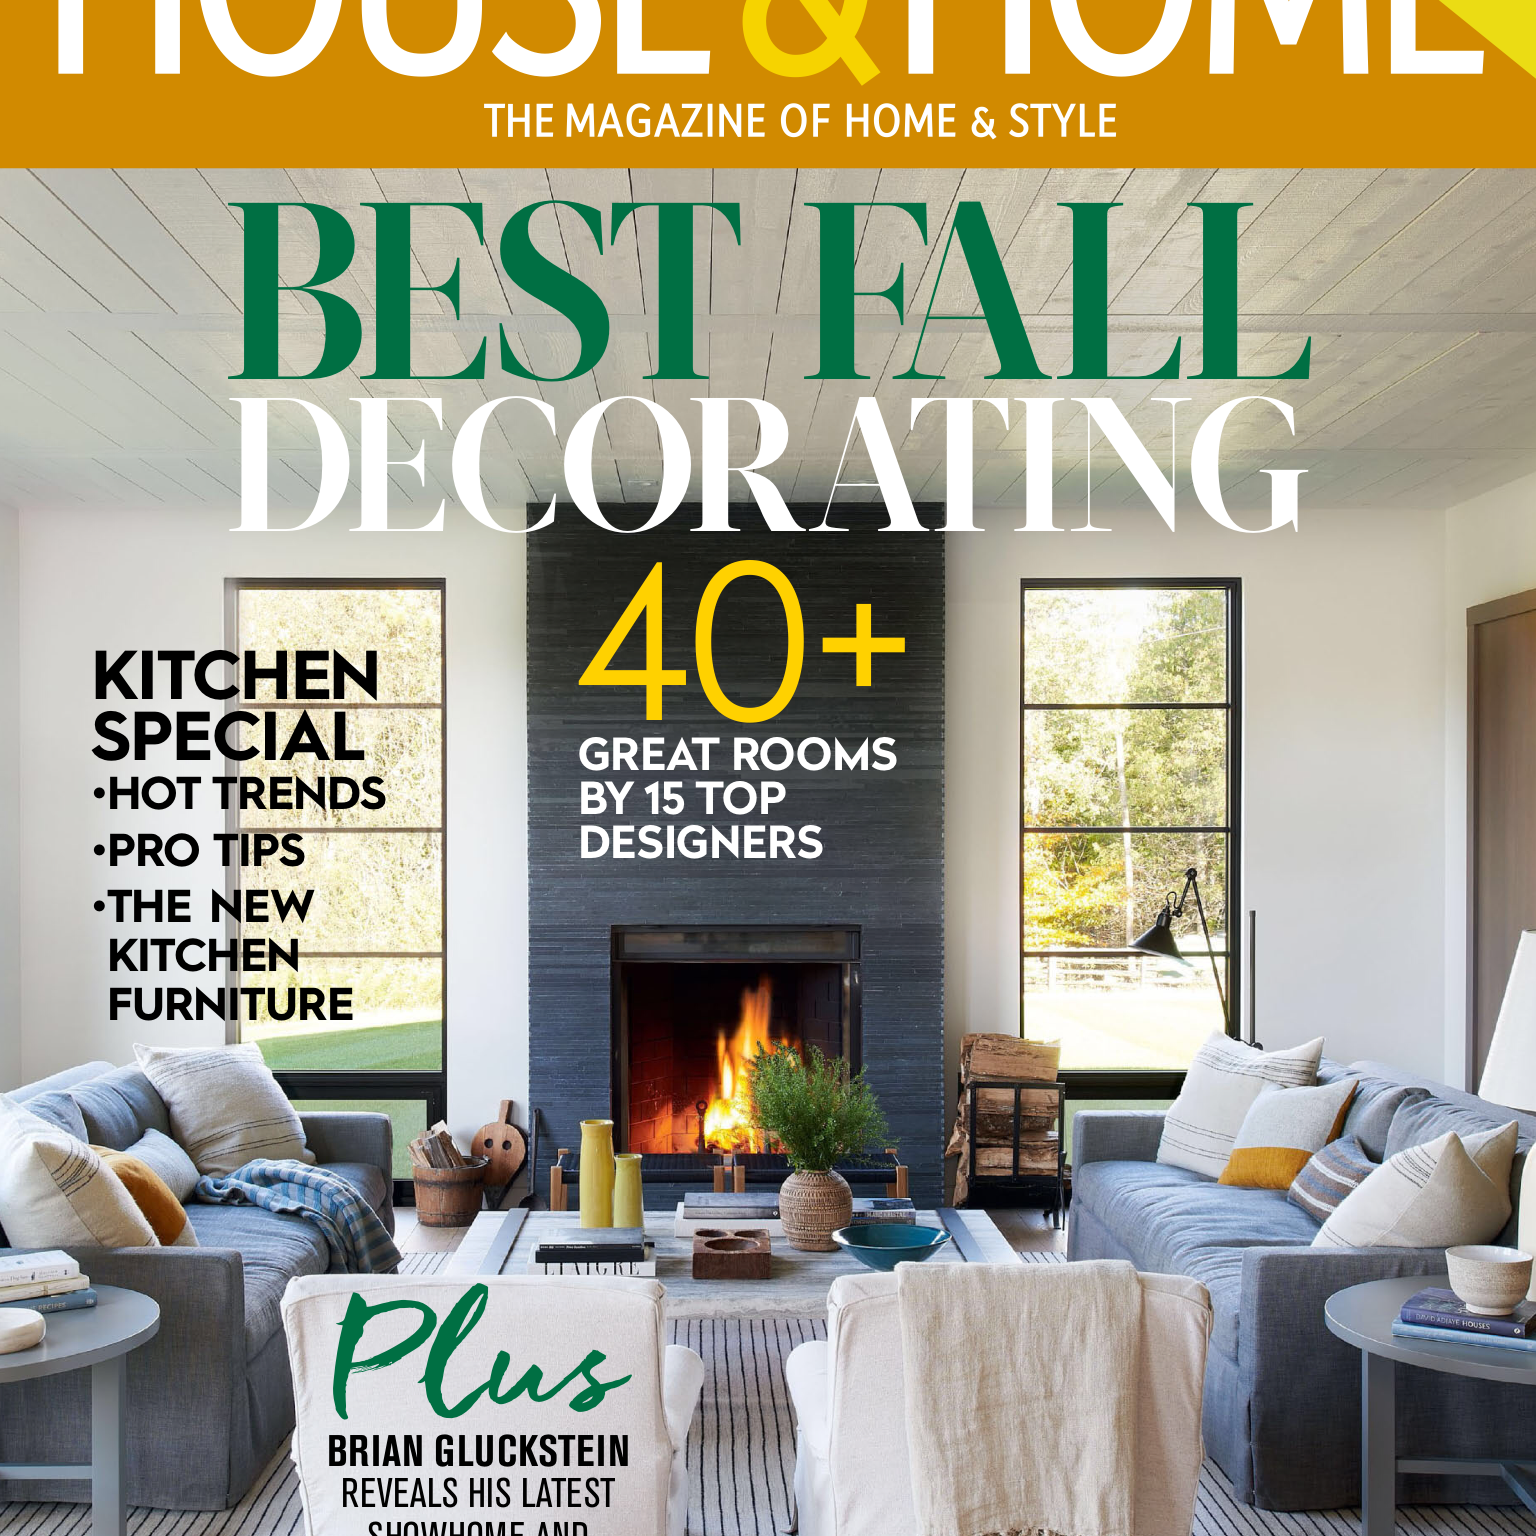 House & Home Oct 2018 Custom Pillows by Tonic Living